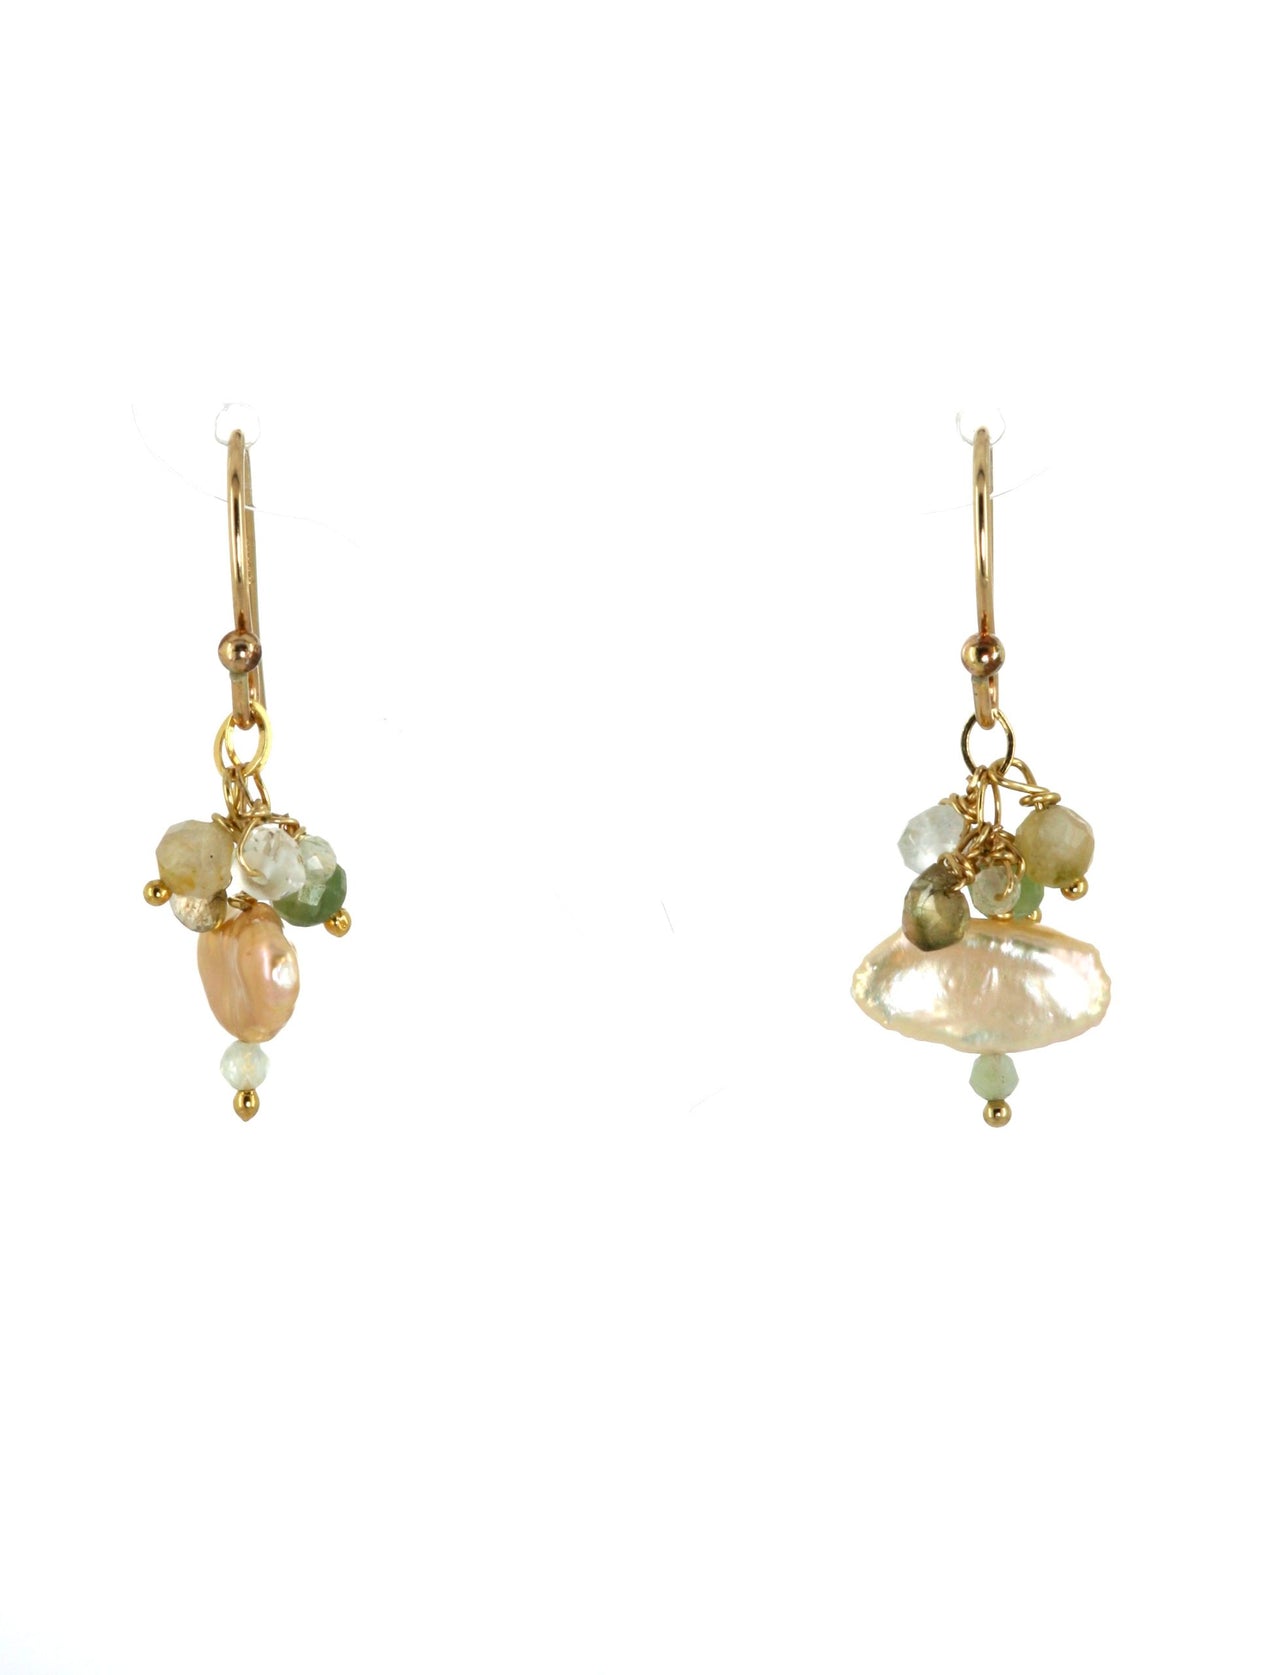 Gold Earrings With Pearl and Tourmaline